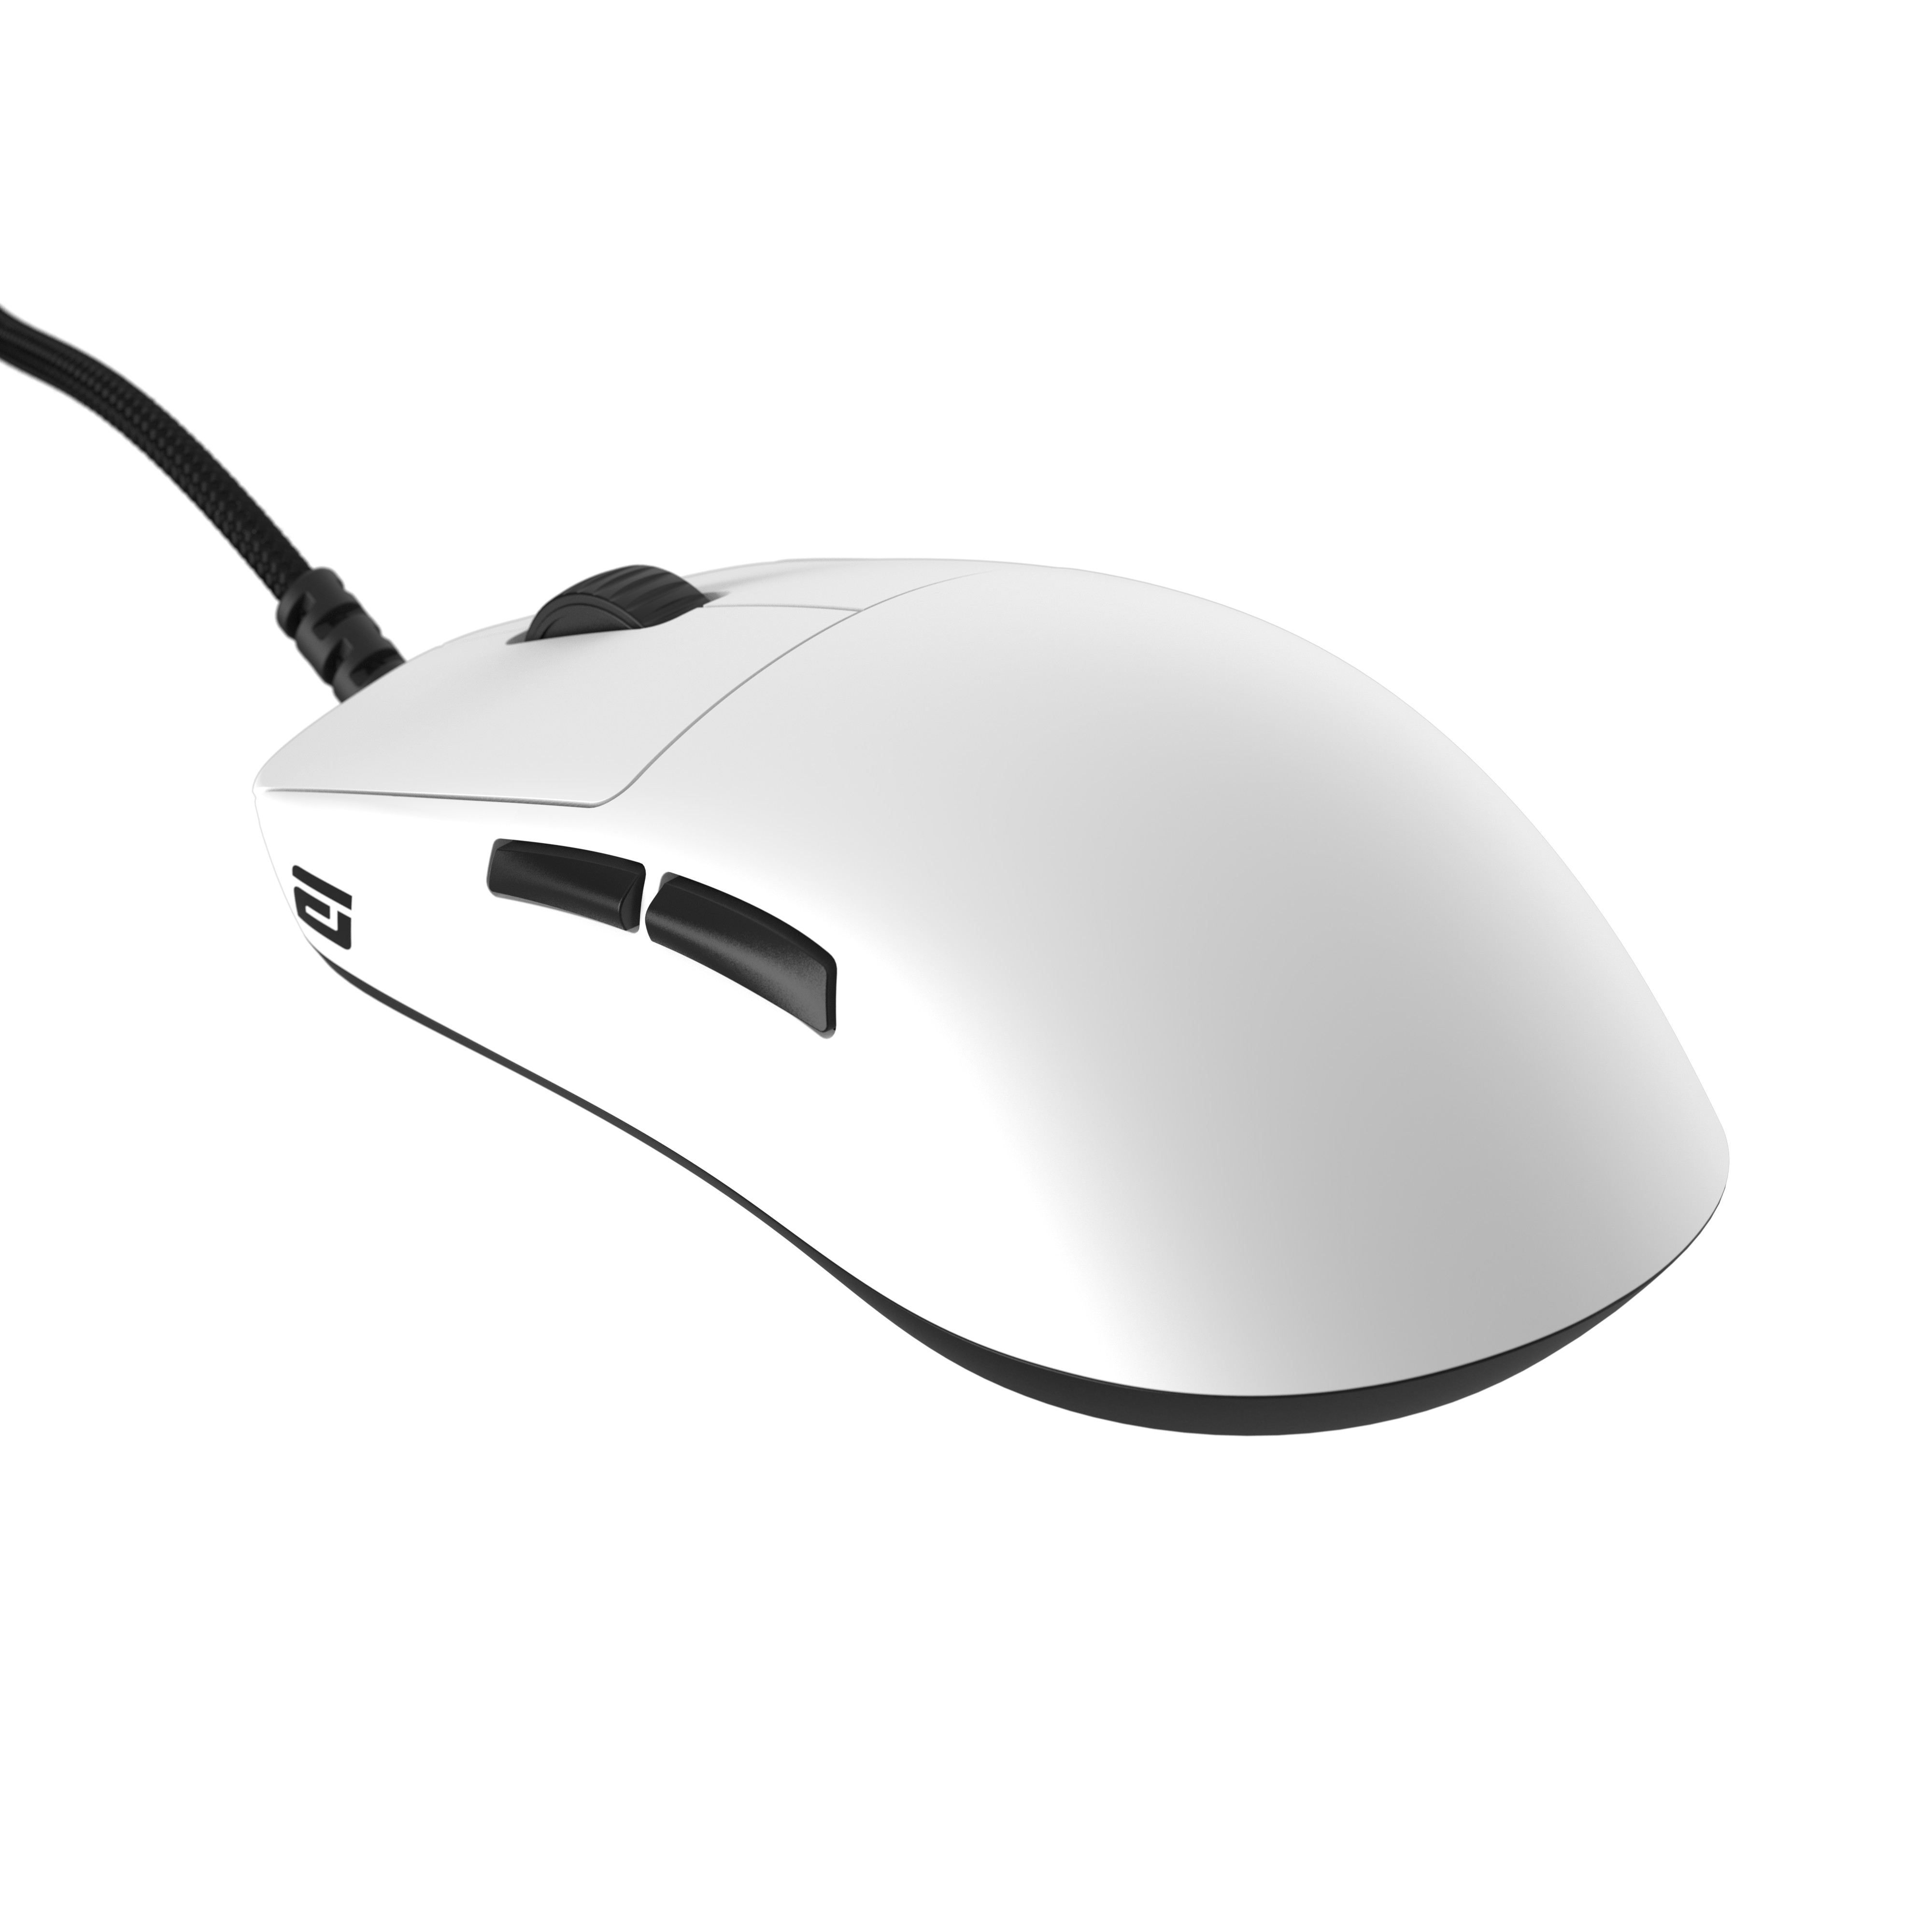 Endgame Gear OP1 8k USB Optical Gaming Mouse - White